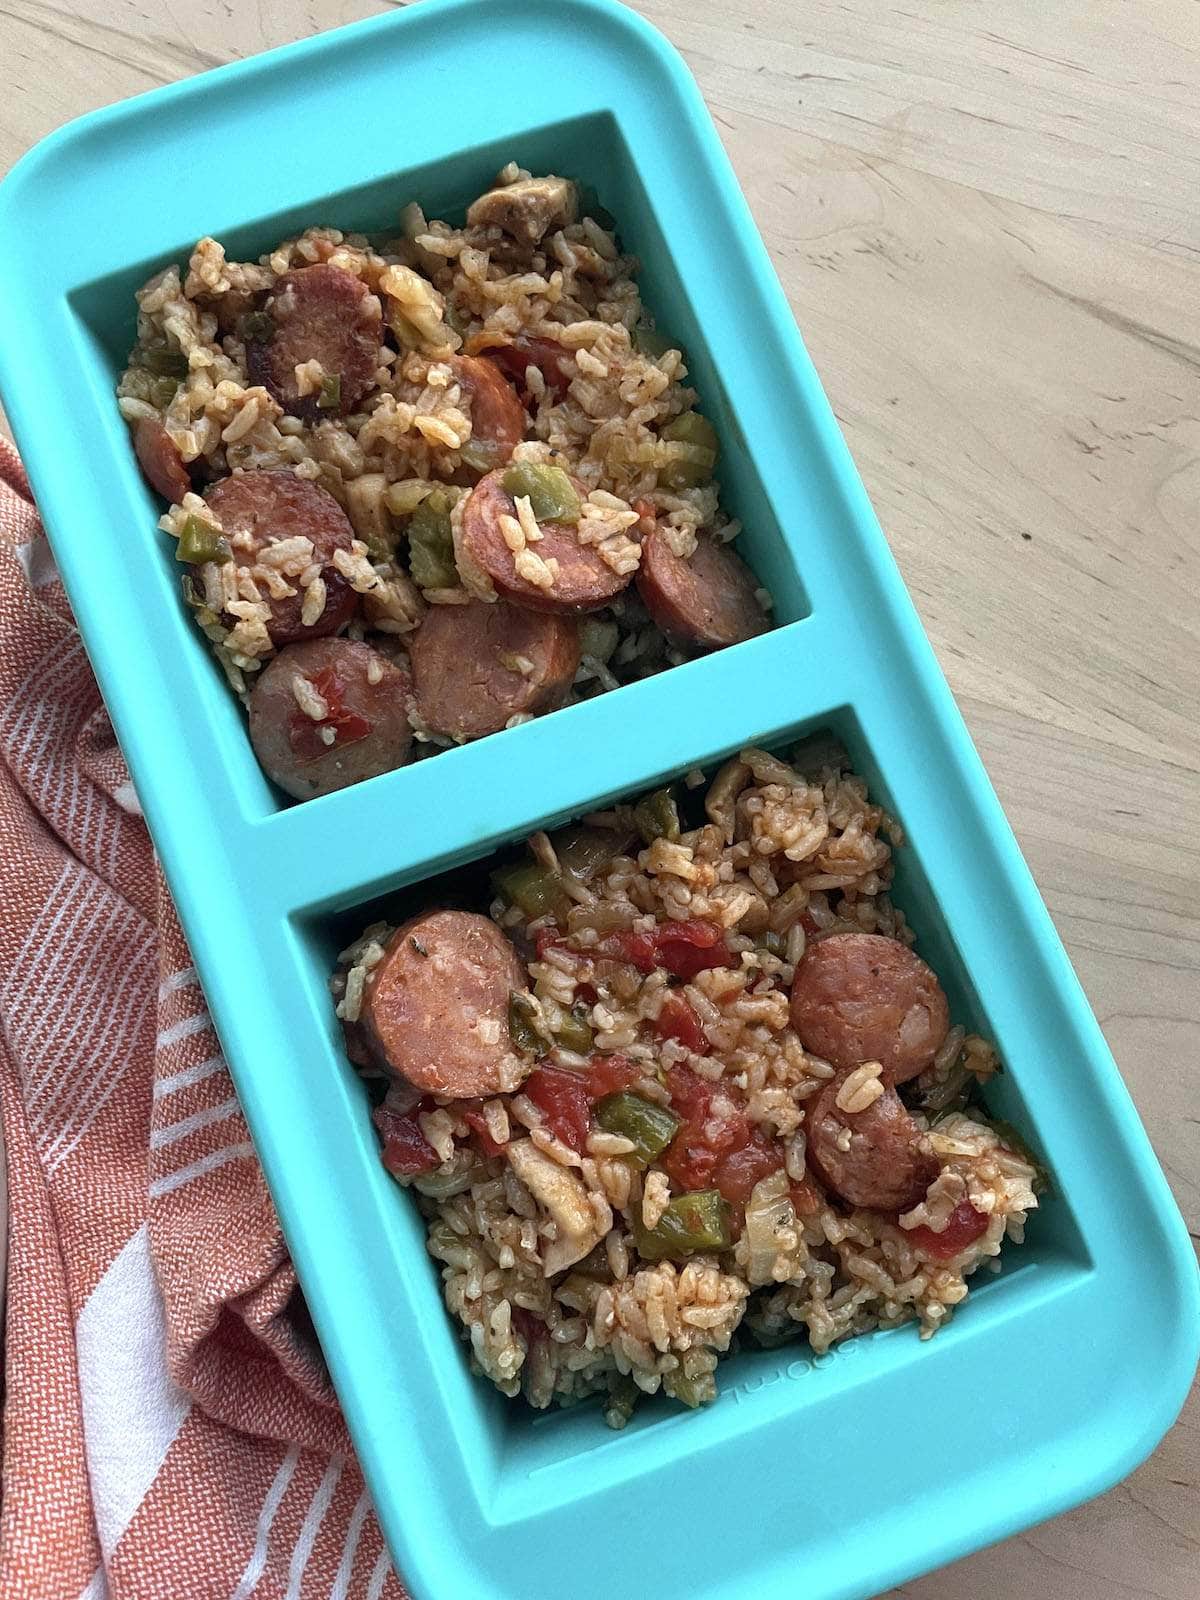 A two cup Souper cube container filled with leftover chicken and sausage jambalaya.